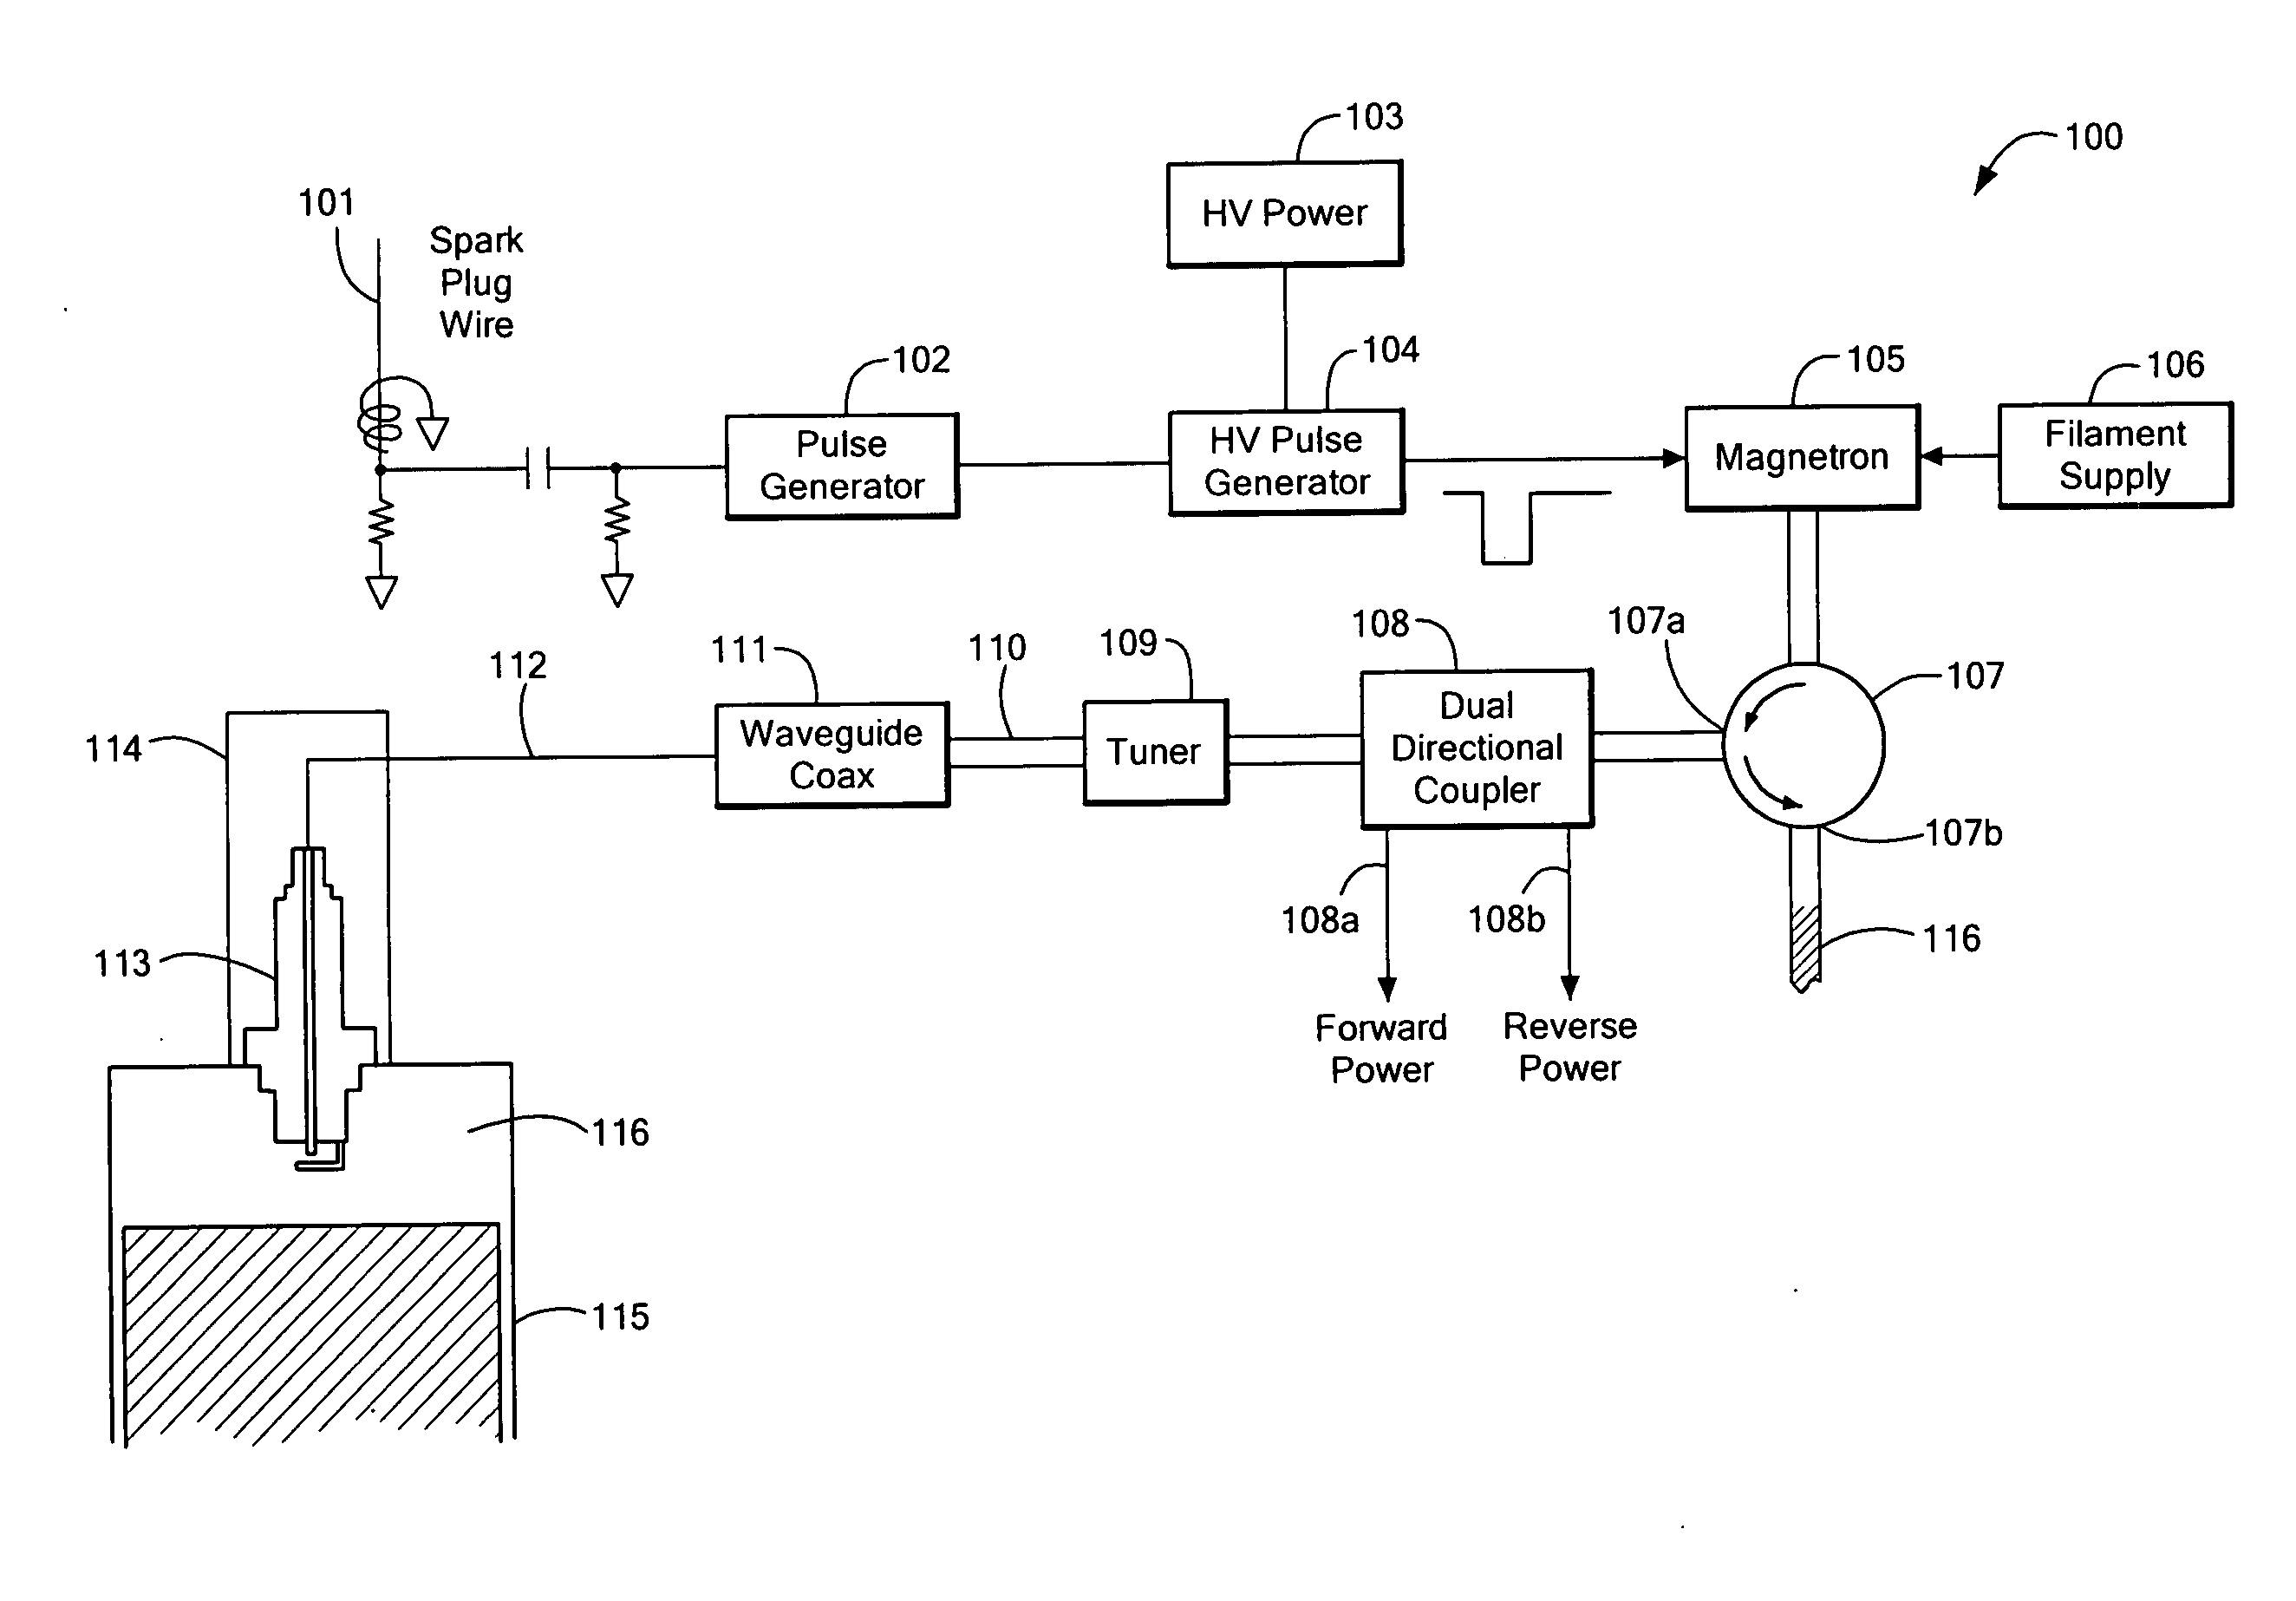 Microwave combustion system for internal combustion engines